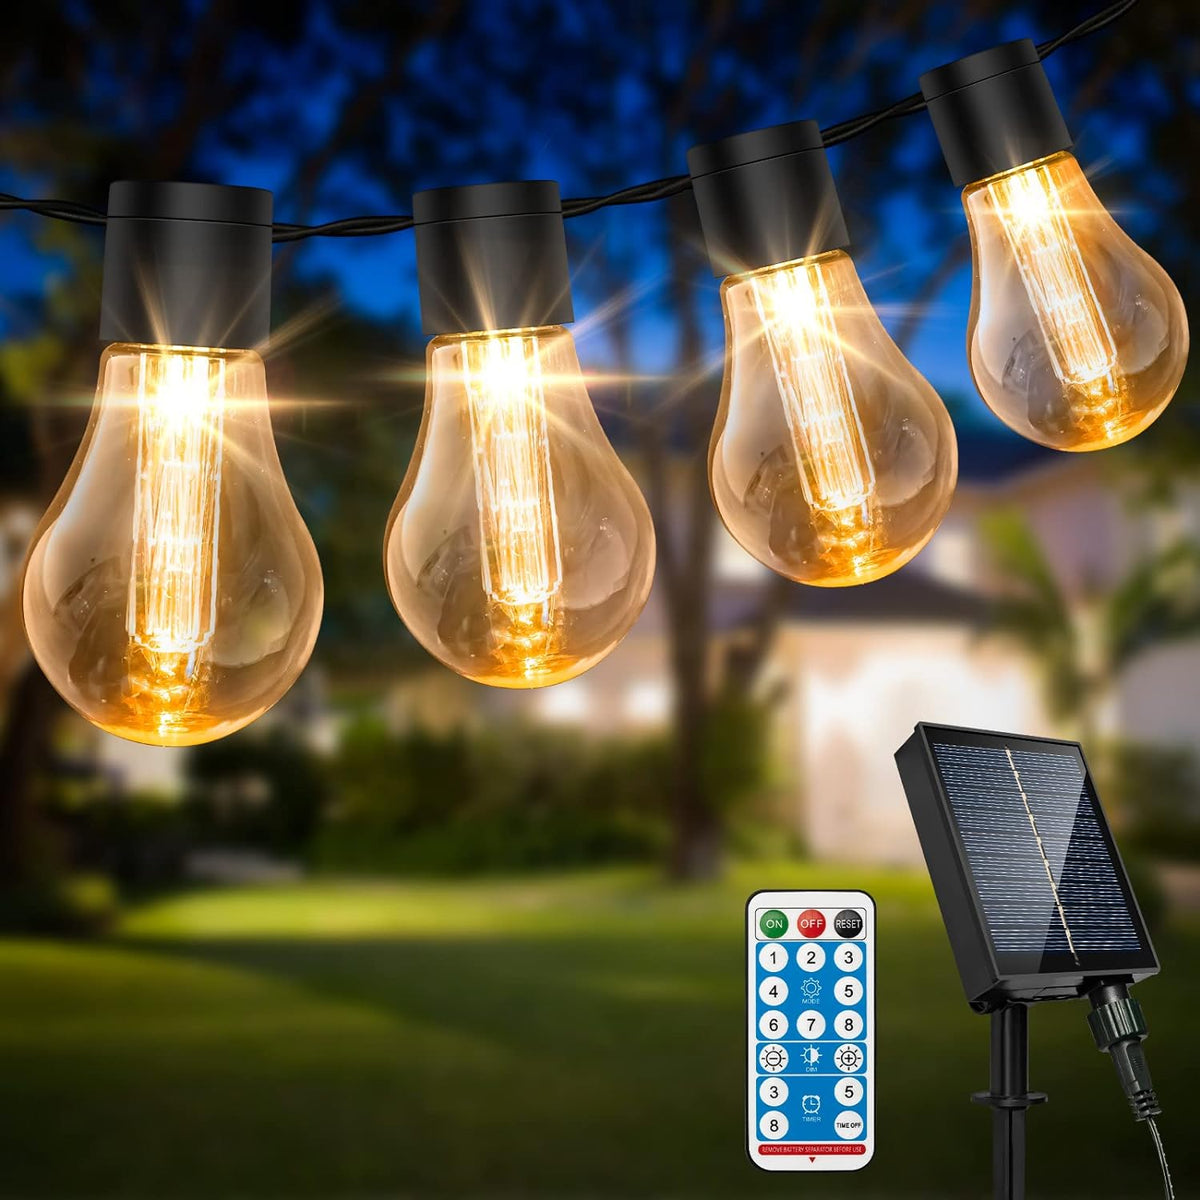 Solar Festoon Lights Outdoor, 29.5Ft Remote Control Solar String Lights Outdoor Waterproof with 8 Modes 20 Shatterproof LED Bulbs for Garden, Gazebo, Patio, Party, Festival Decoration